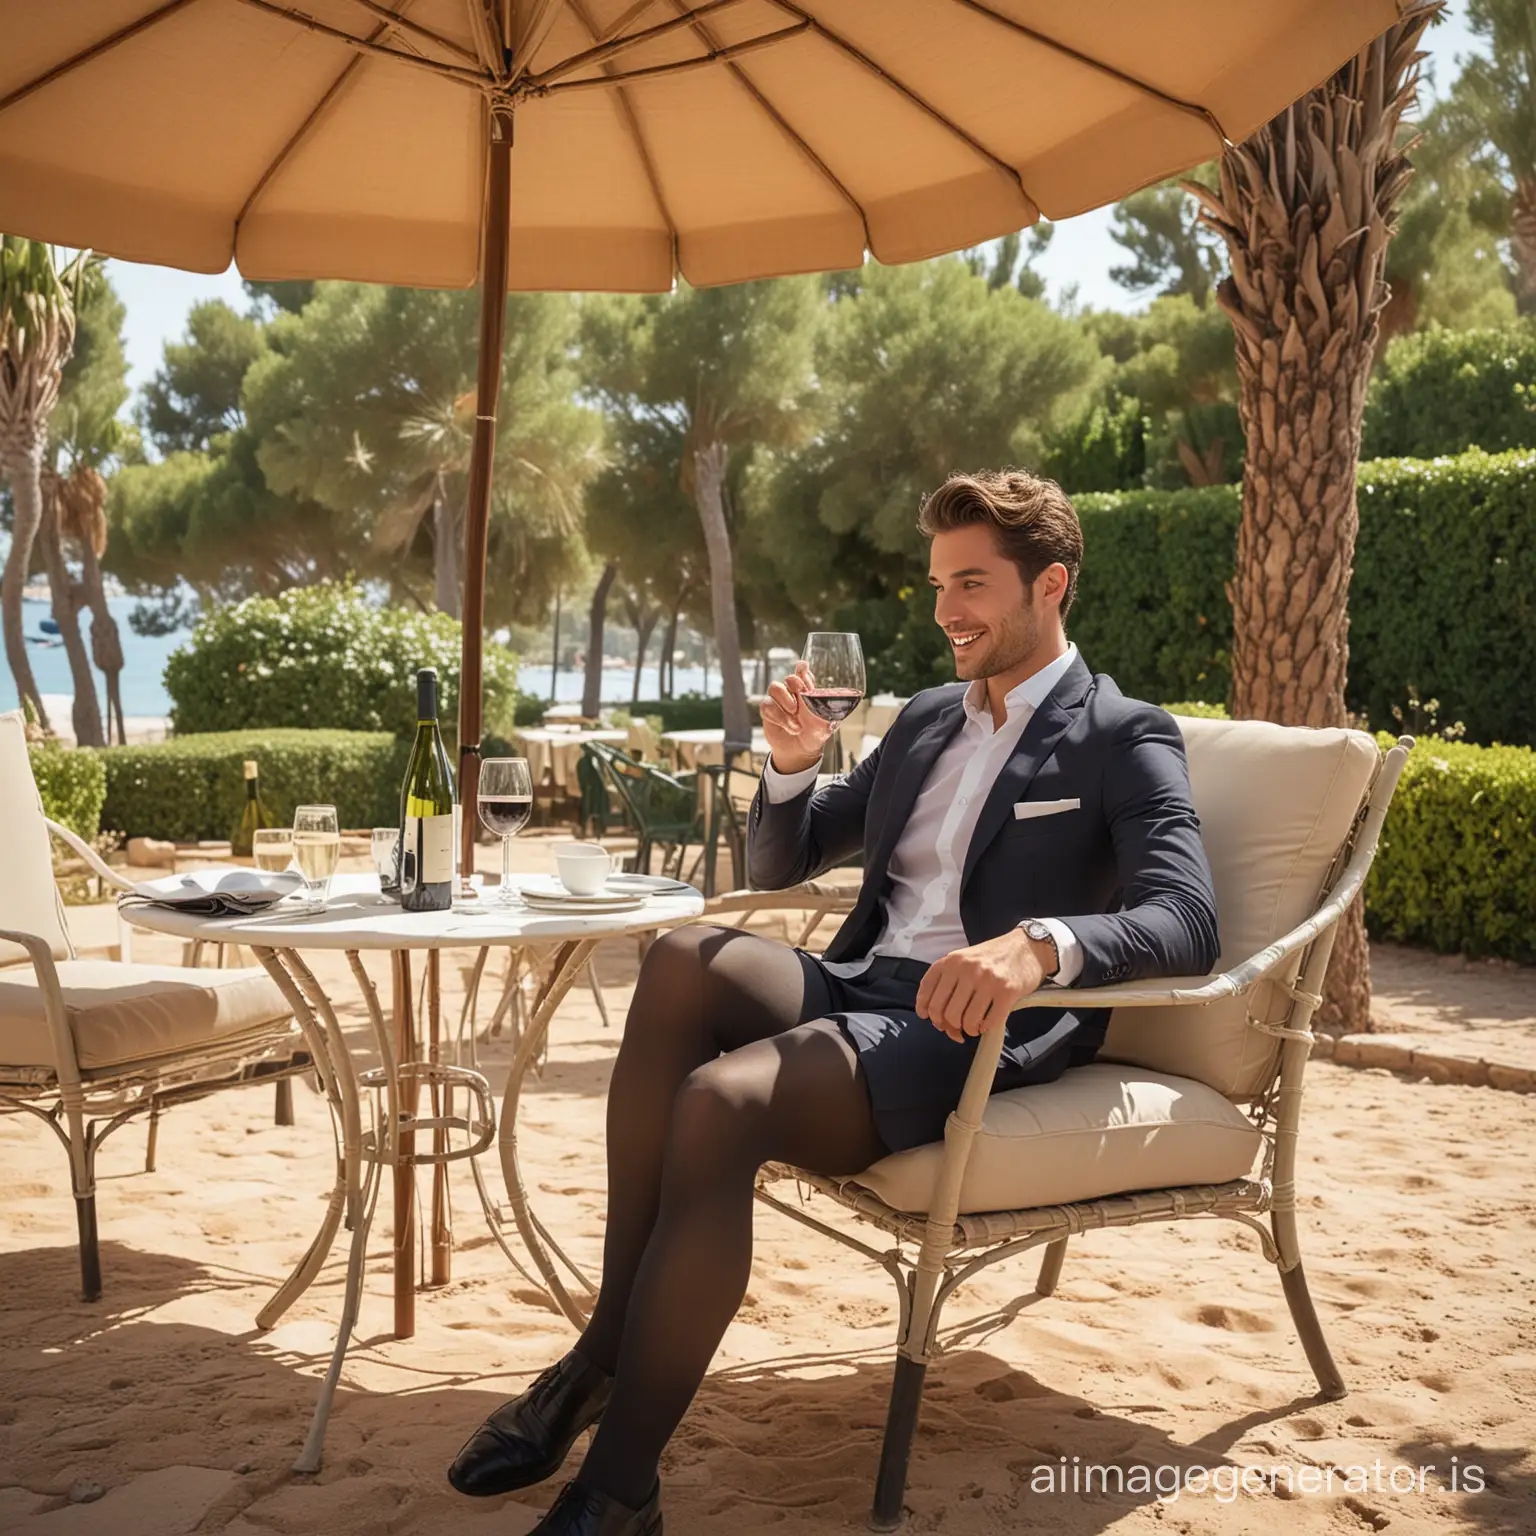 sturdy rugged 28-year old business man wearing sheer tights and sitting on a chair at a table under a parasol in a hotel in Saint-Tropez and drinking wine